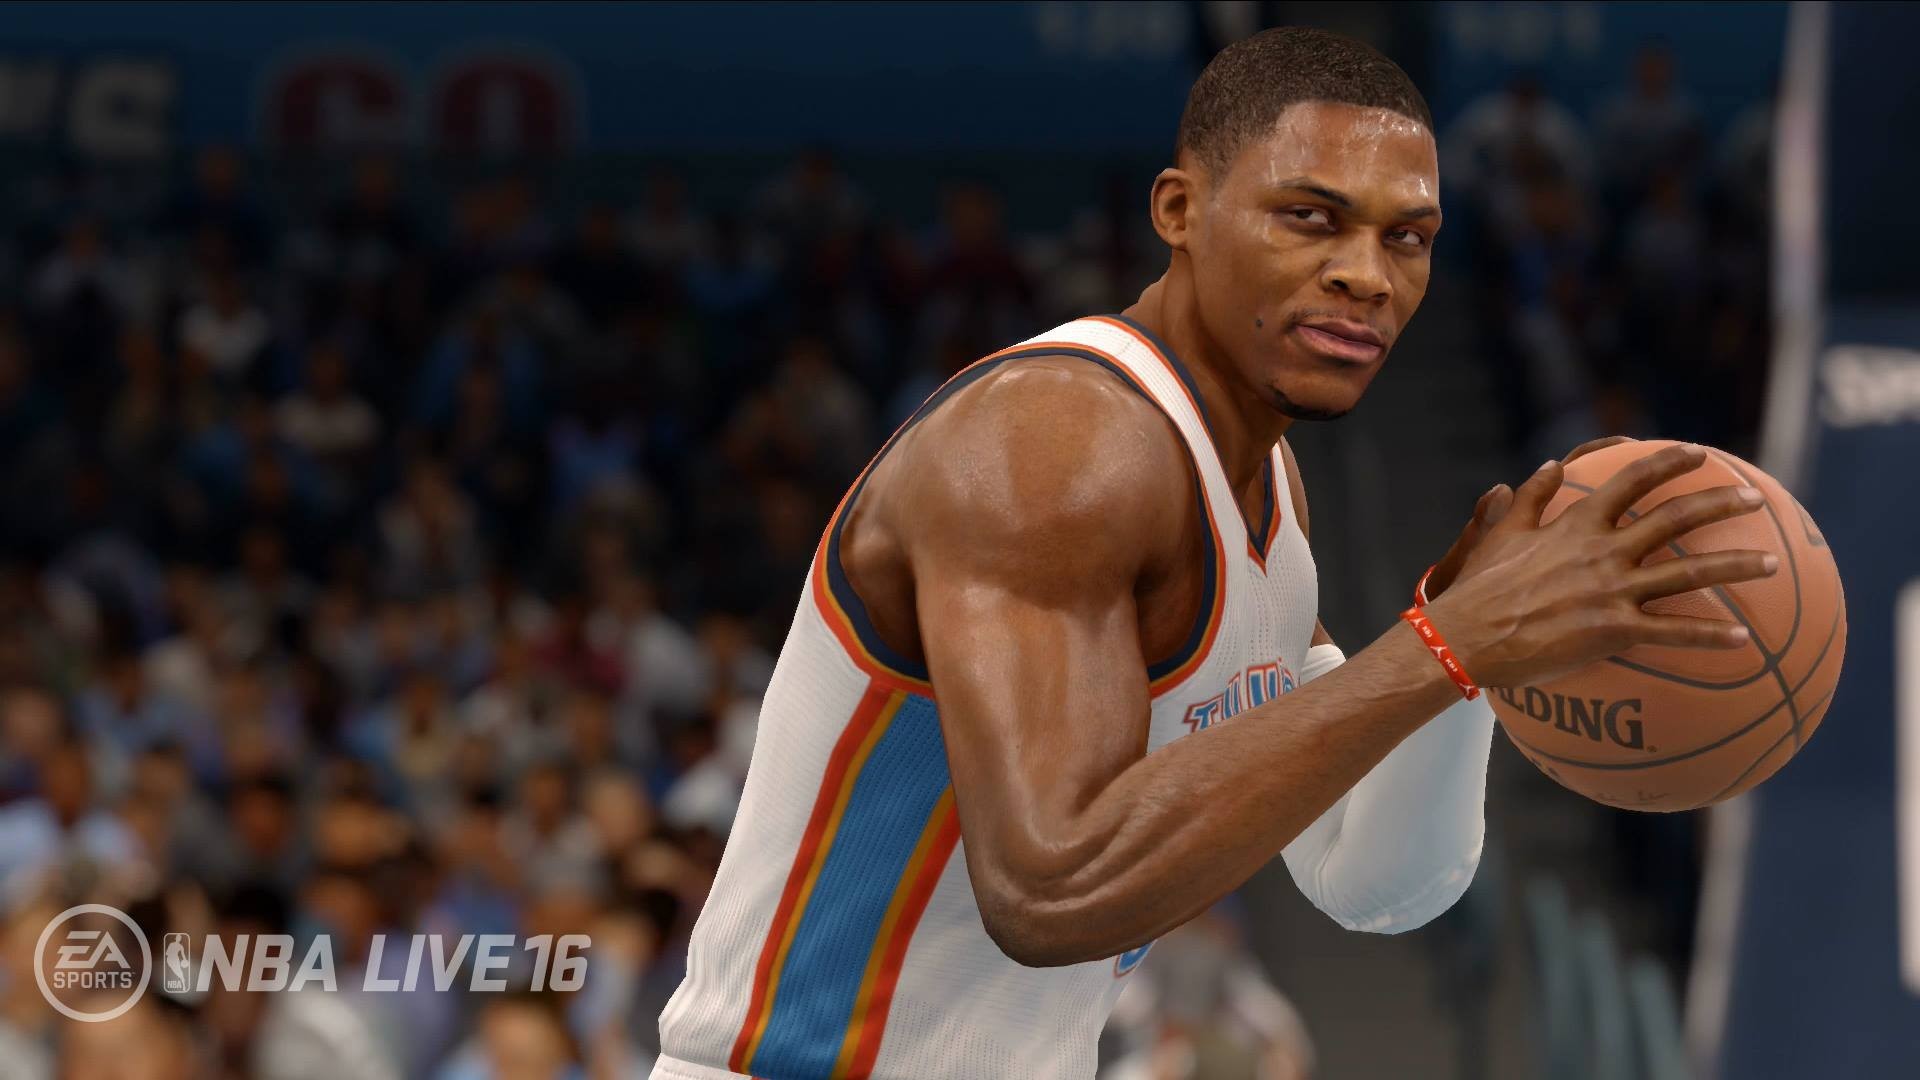 1920x1080 Another NBA Live 16 Screenshot of Russell Westbrook